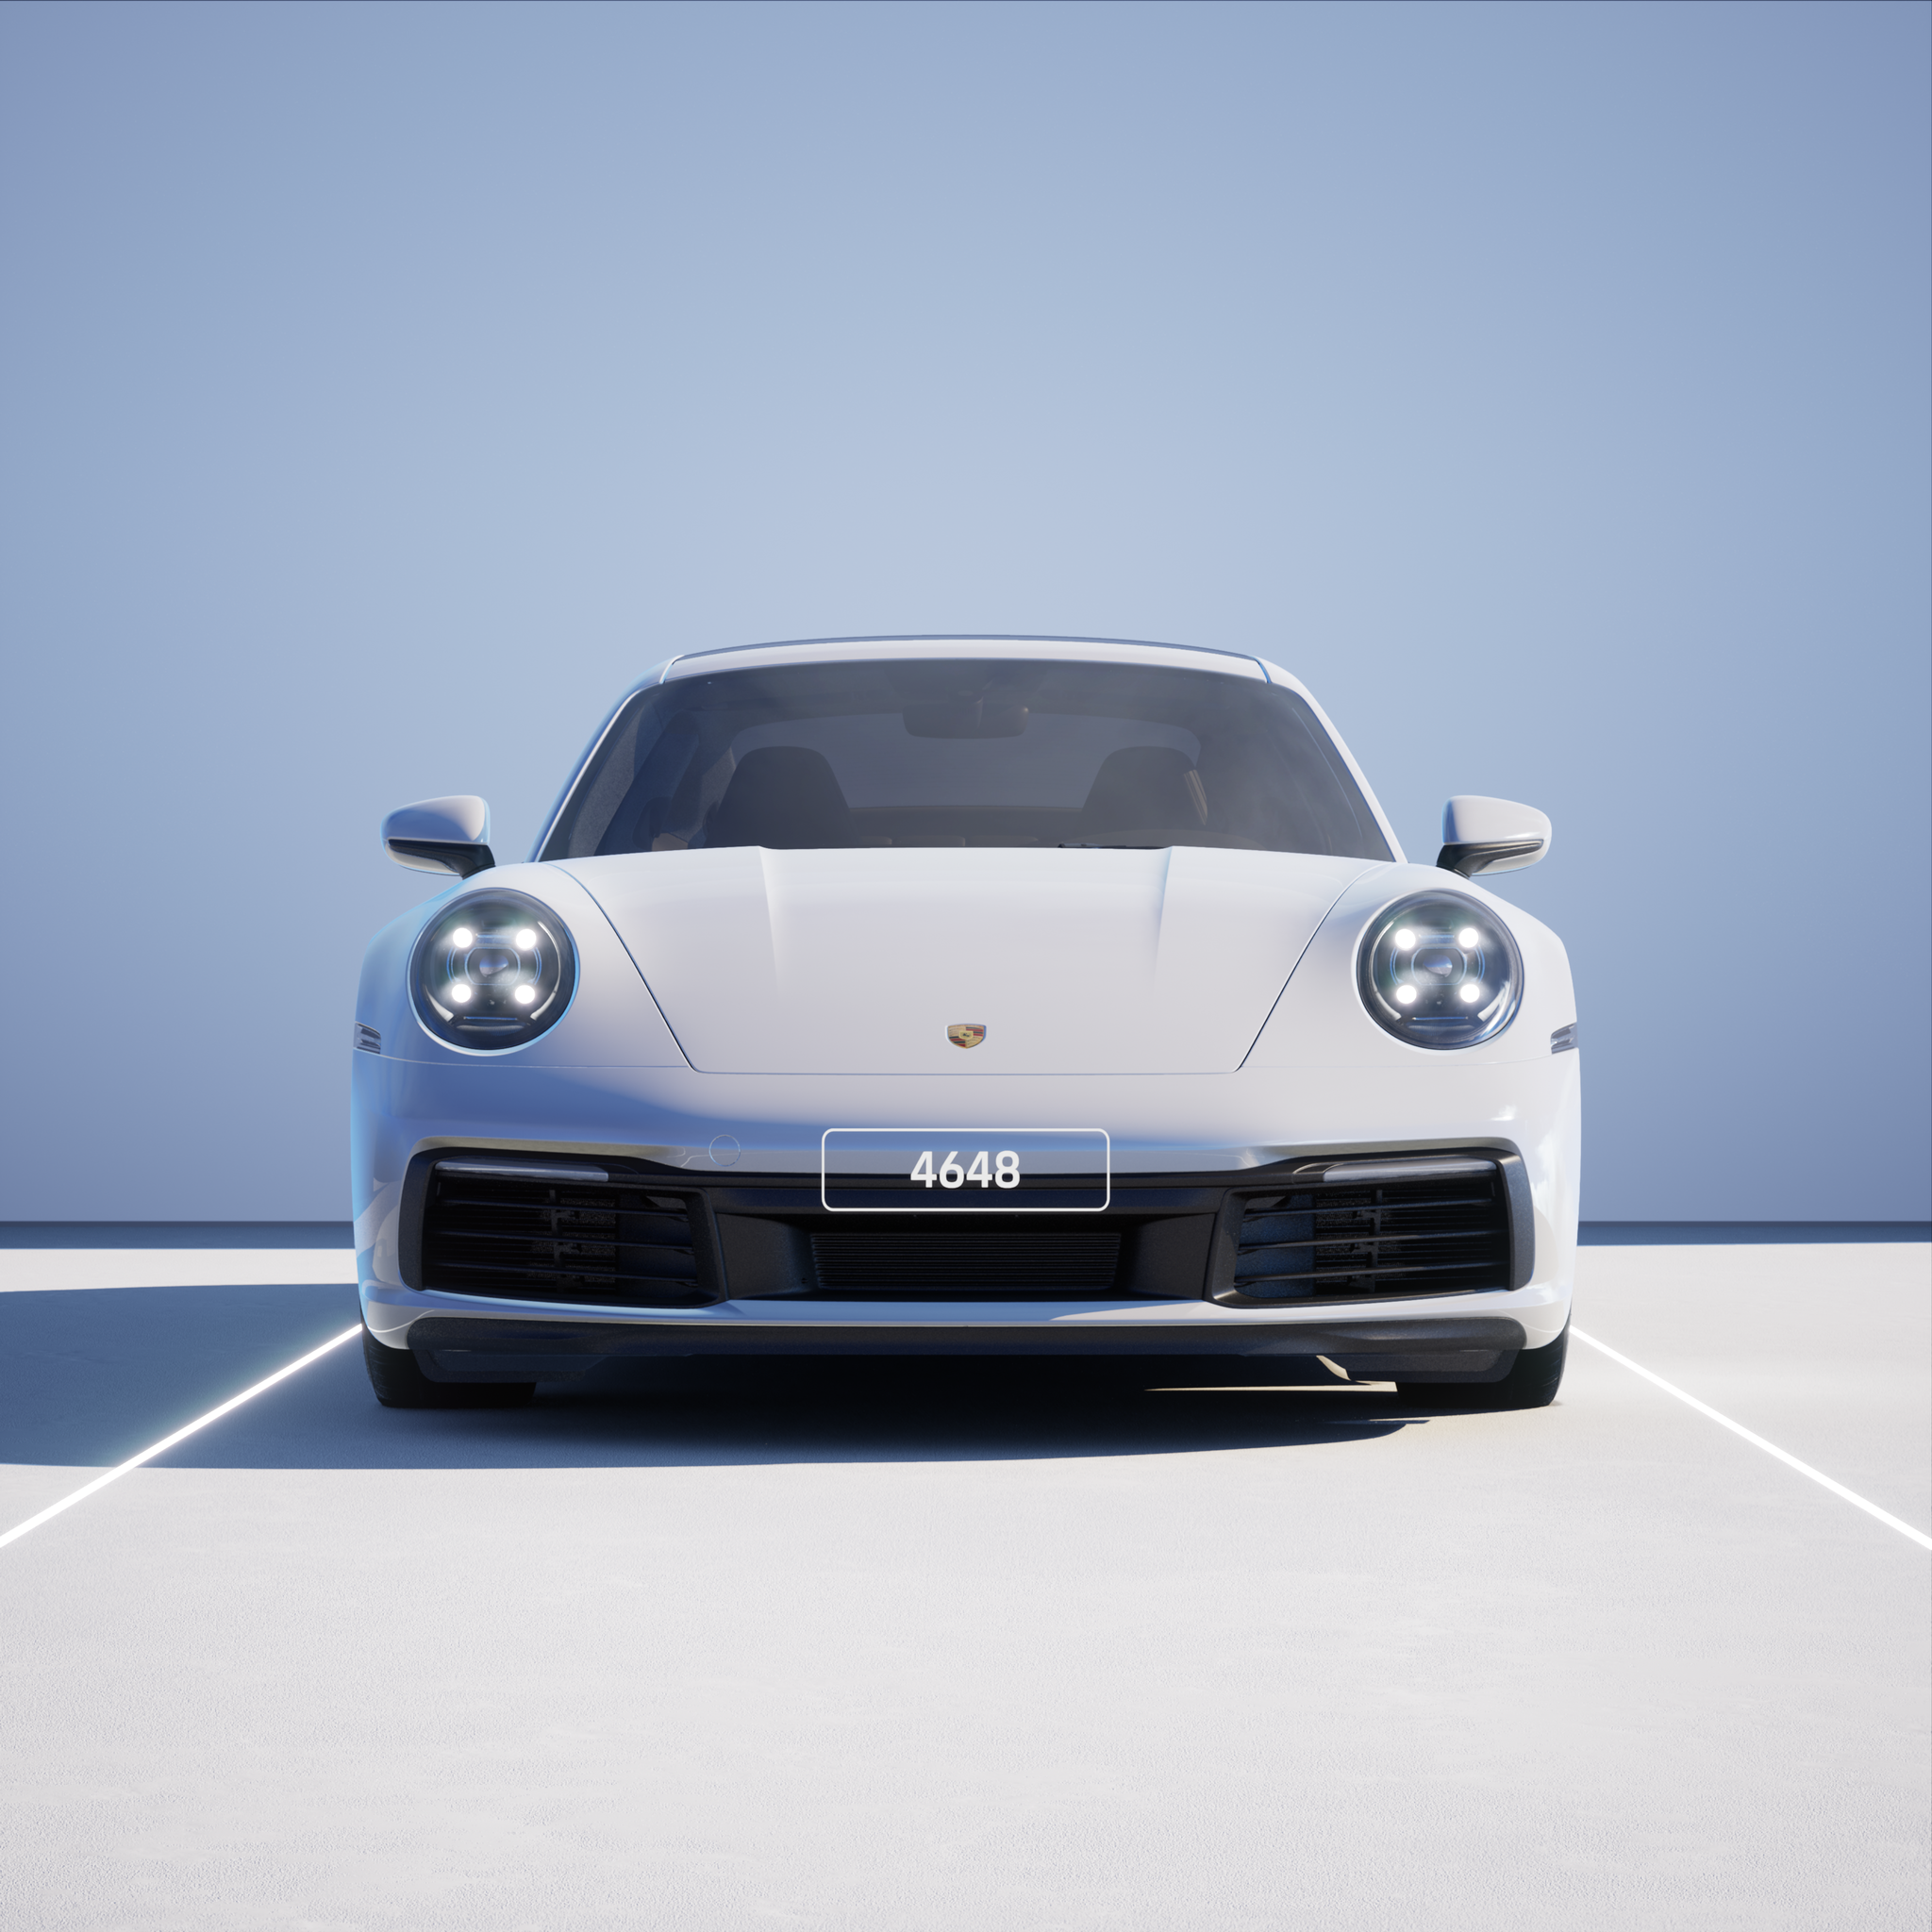 The PORSCHΞ 911 4648 image in phase